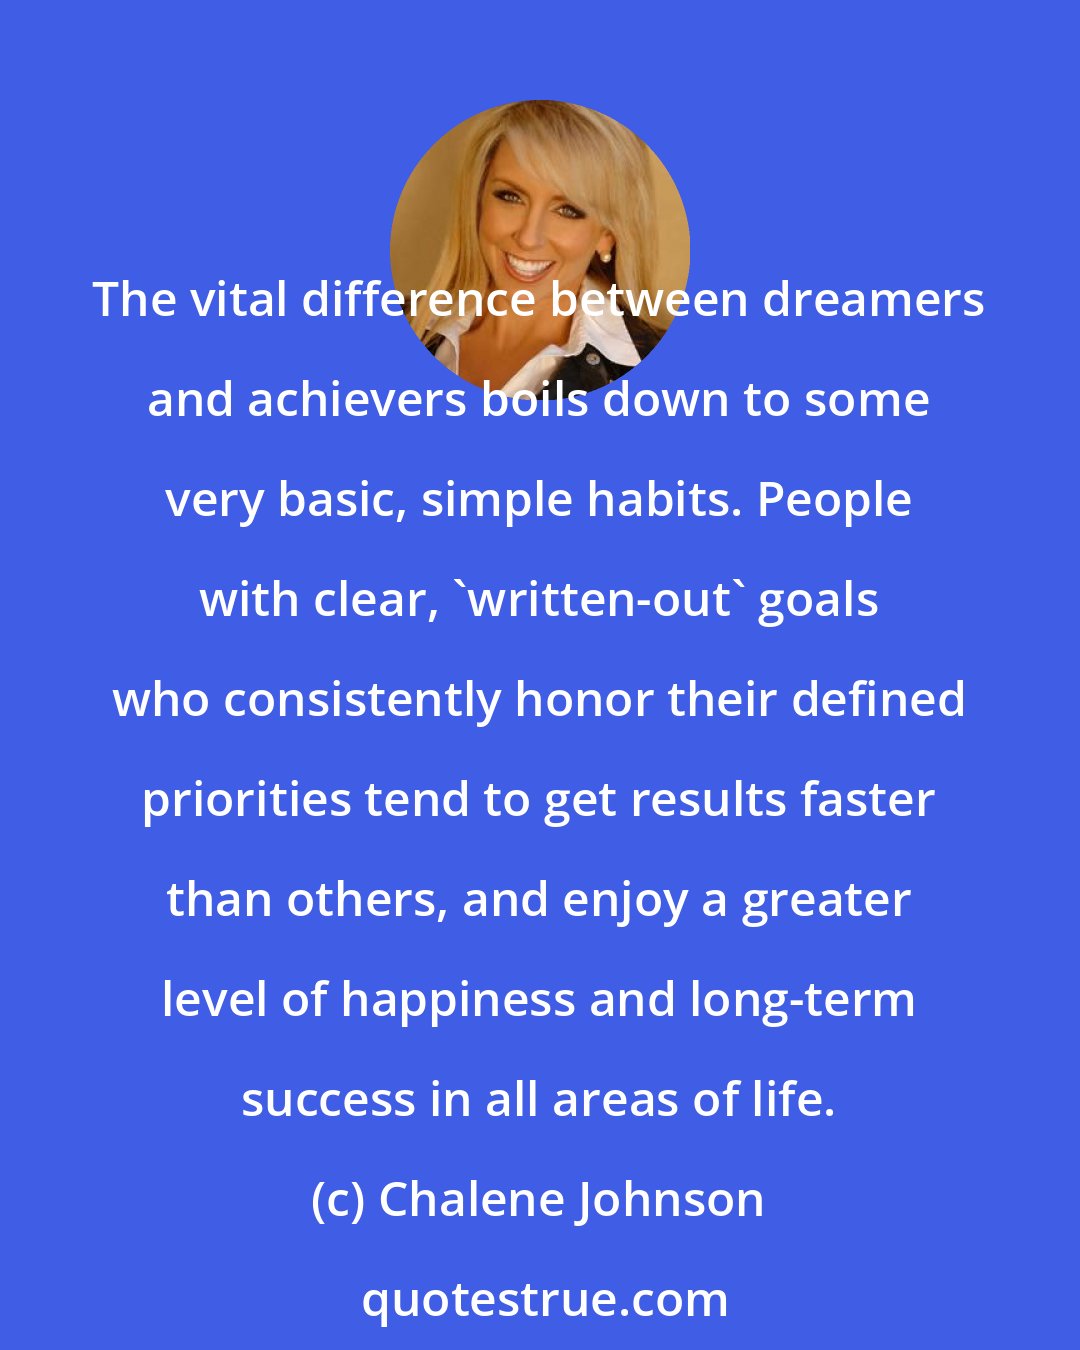 Chalene Johnson: The vital difference between dreamers and achievers boils down to some very basic, simple habits. People with clear, 'written-out' goals who consistently honor their defined priorities tend to get results faster than others, and enjoy a greater level of happiness and long-term success in all areas of life.